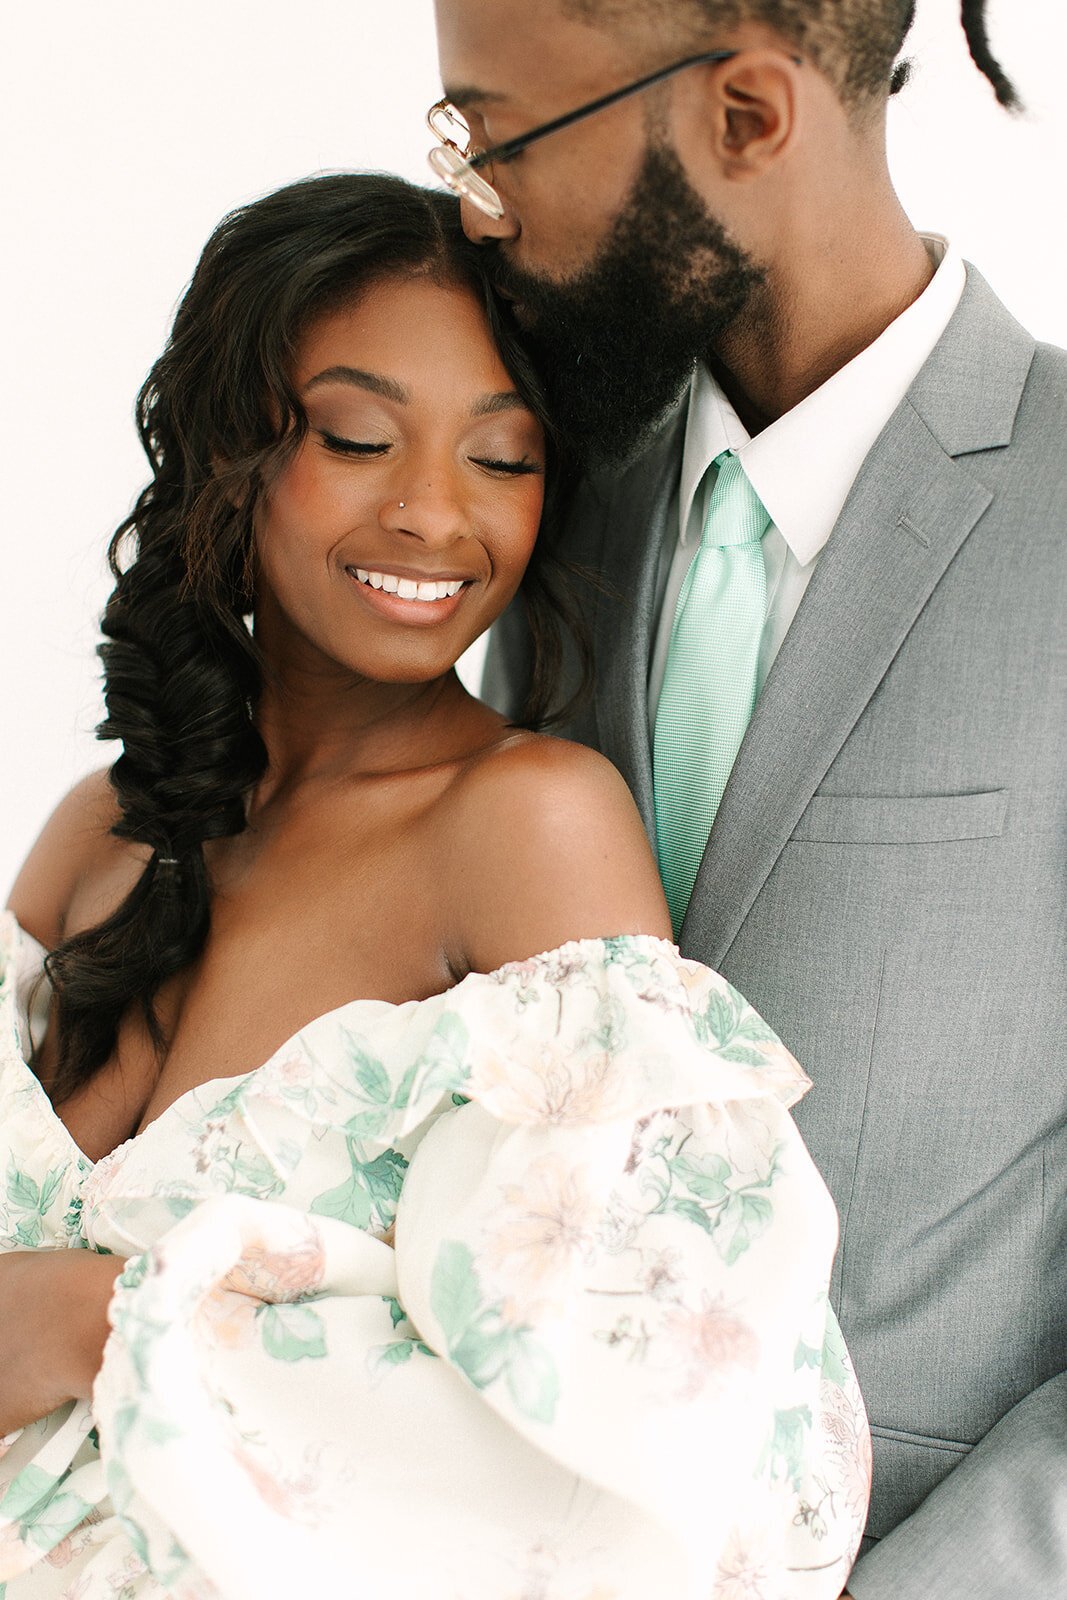 A black couple embraces. The bride wears a custom floral gown by Sarah Kolis and makeup by D Neiswender Artistry